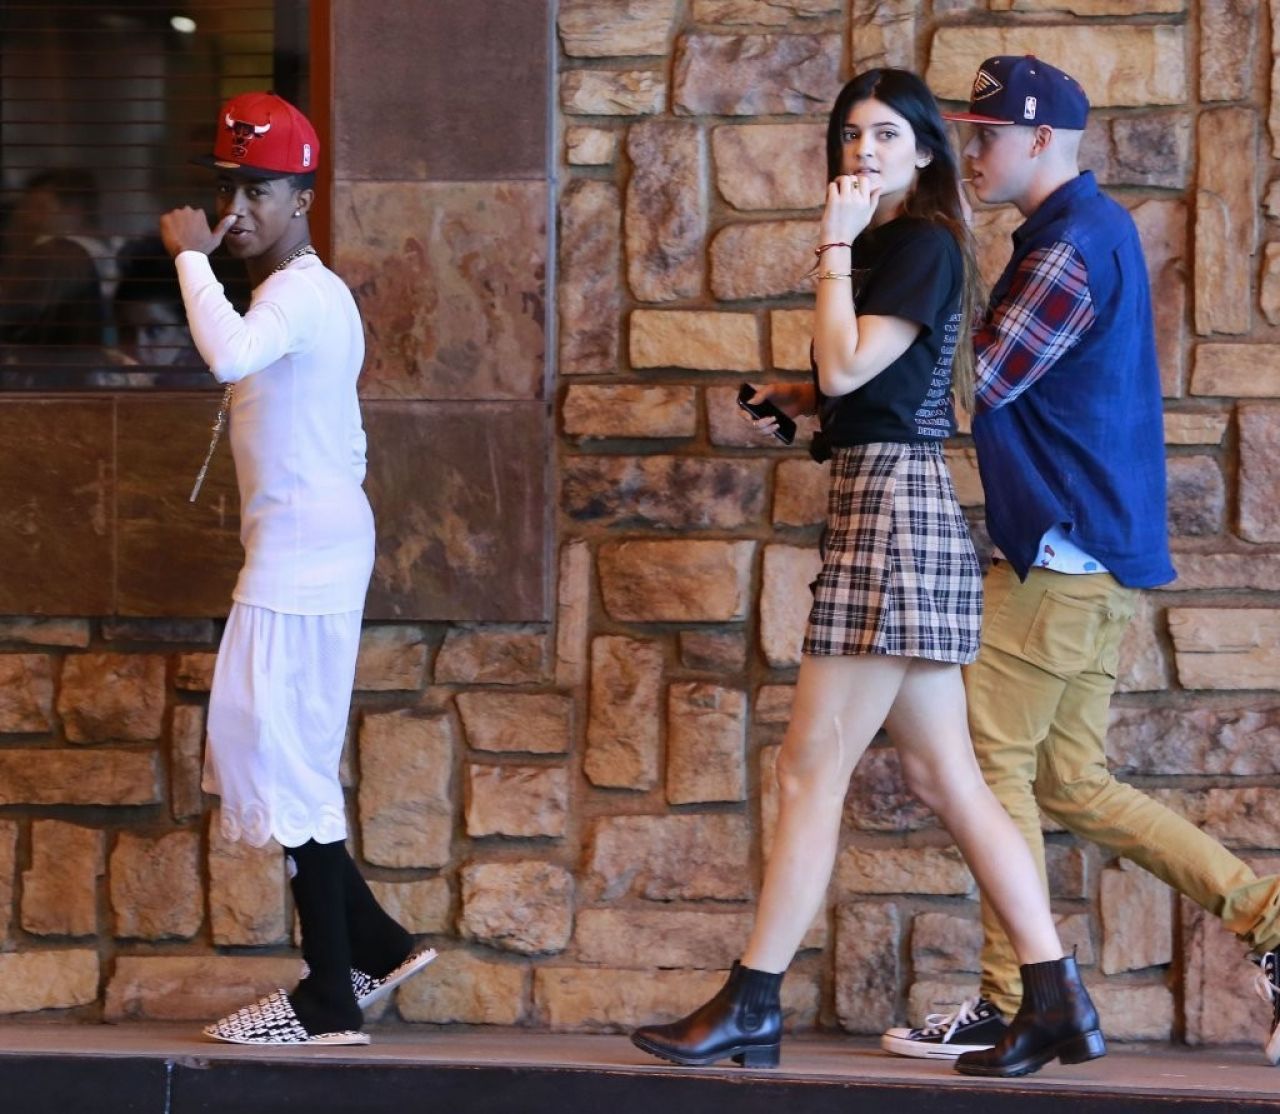 Kylie Jenner Los Angeles March 11, 2013 – Star Style